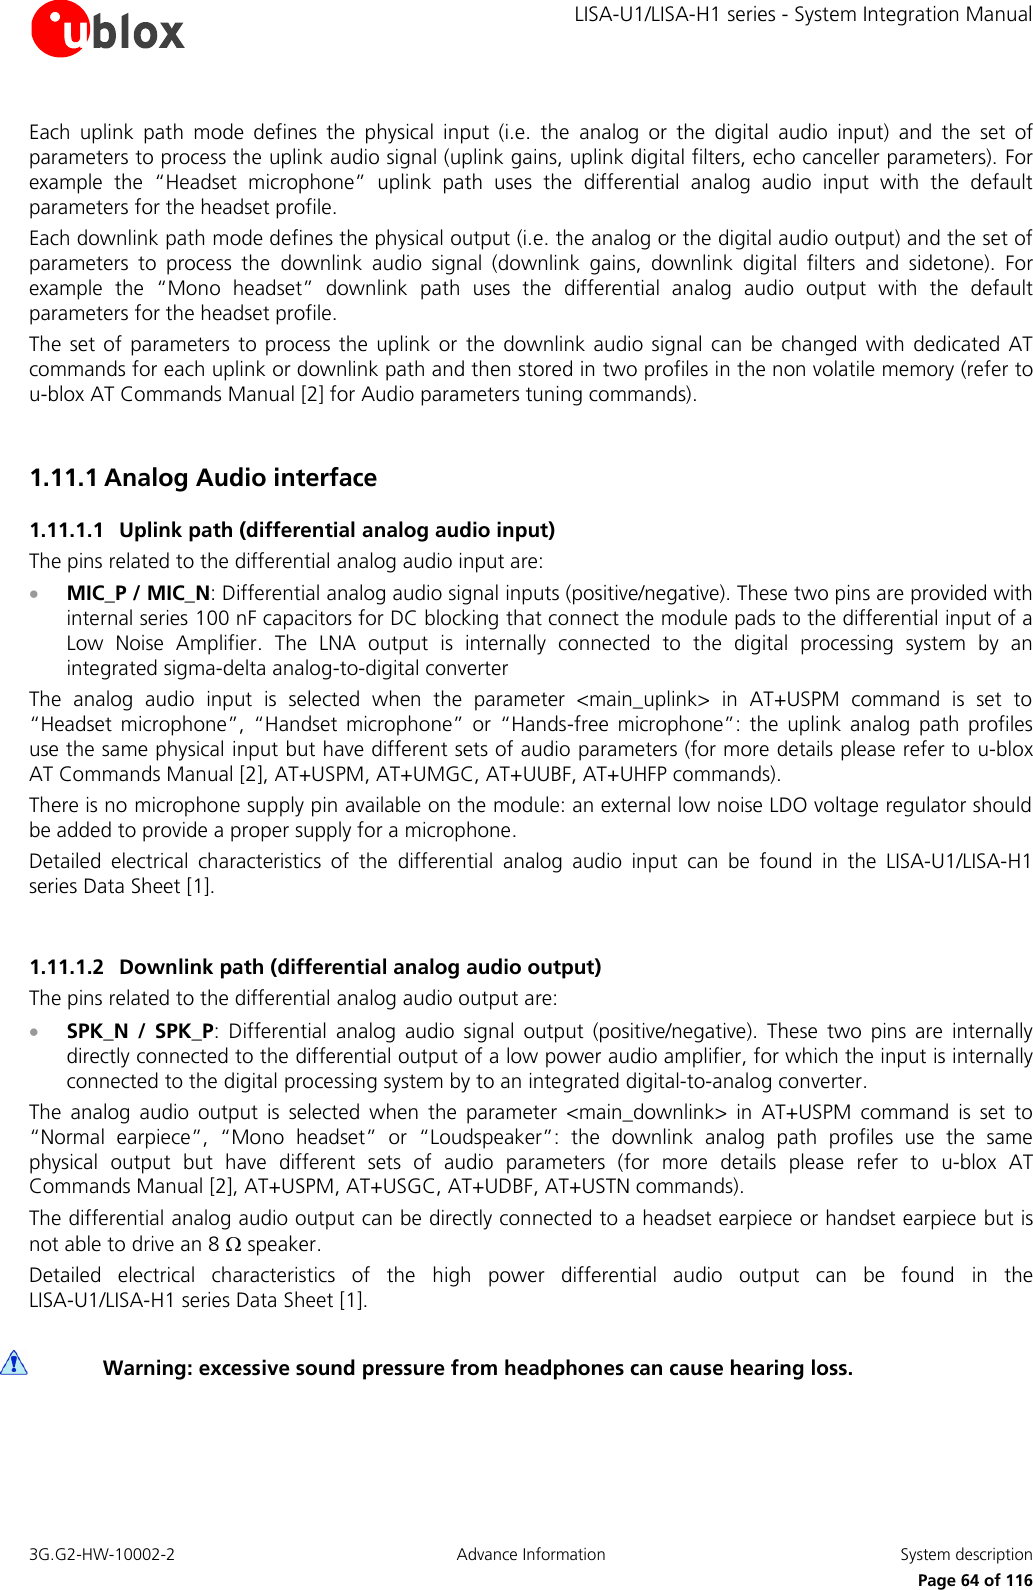     LISA-U1/LISA-H1 series - System Integration Manual 3G.G2-HW-10002-2  Advance Information  System description      Page 64 of 116 Each  uplink  path  mode  defines  the  physical  input  (i.e.  the  analog  or  the  digital  audio  input)  and  the  set  of parameters to process the uplink audio signal (uplink gains, uplink digital filters, echo canceller parameters). For example  the  “Headset  microphone”  uplink  path  uses  the  differential  analog  audio  input  with  the  default parameters for the headset profile. Each downlink path mode defines the physical output (i.e. the analog or the digital audio output) and the set of parameters  to  process  the  downlink  audio  signal  (downlink  gains,  downlink  digital  filters  and  sidetone).  For example  the  “Mono  headset”  downlink  path  uses  the  differential  analog  audio  output  with  the  default parameters for the headset profile.  The  set of  parameters to  process the  uplink  or  the  downlink  audio signal can  be  changed  with  dedicated  AT commands for each uplink or downlink path and then stored in two profiles in the non volatile memory (refer to u-blox AT Commands Manual [2] for Audio parameters tuning commands).  1.11.1 Analog Audio interface 1.11.1.1 Uplink path (differential analog audio input) The pins related to the differential analog audio input are:  MIC_P / MIC_N: Differential analog audio signal inputs (positive/negative). These two pins are provided with internal series 100 nF capacitors for DC blocking that connect the module pads to the differential input of a Low  Noise  Amplifier.  The  LNA  output  is  internally  connected  to  the  digital  processing  system  by  an integrated sigma-delta analog-to-digital converter The  analog  audio  input  is  selected  when  the  parameter  &lt;main_uplink&gt;  in  AT+USPM  command  is  set  to “Headset  microphone”,  “Handset  microphone”  or  “Hands-free  microphone”:  the  uplink  analog  path  profiles use the same physical input but have different sets of audio parameters (for more details please refer to u-blox AT Commands Manual [2], AT+USPM, AT+UMGC, AT+UUBF, AT+UHFP commands). There is no microphone supply pin available on the module: an external low noise LDO voltage regulator should be added to provide a proper supply for a microphone. Detailed  electrical  characteristics  of  the  differential  analog  audio  input  can  be  found  in  the  LISA-U1/LISA-H1 series Data Sheet [1].  1.11.1.2 Downlink path (differential analog audio output) The pins related to the differential analog audio output are:  SPK_N  /  SPK_P:  Differential  analog  audio  signal  output  (positive/negative).  These  two  pins  are  internally directly connected to the differential output of a low power audio amplifier, for which the input is internally connected to the digital processing system by to an integrated digital-to-analog converter. The  analog  audio  output  is  selected  when  the  parameter  &lt;main_downlink&gt;  in  AT+USPM  command  is  set  to “Normal  earpiece”,  “Mono  headset”  or  “Loudspeaker”:  the  downlink  analog  path  profiles  use  the  same physical  output  but  have  different  sets  of  audio  parameters  (for  more  details  please  refer  to  u-blox  AT Commands Manual [2], AT+USPM, AT+USGC, AT+UDBF, AT+USTN commands). The differential analog audio output can be directly connected to a headset earpiece or handset earpiece but is not able to drive an 8  speaker. Detailed  electrical  characteristics  of  the  high  power  differential  audio  output  can  be  found  in  the  LISA-U1/LISA-H1 series Data Sheet [1].   Warning: excessive sound pressure from headphones can cause hearing loss.  